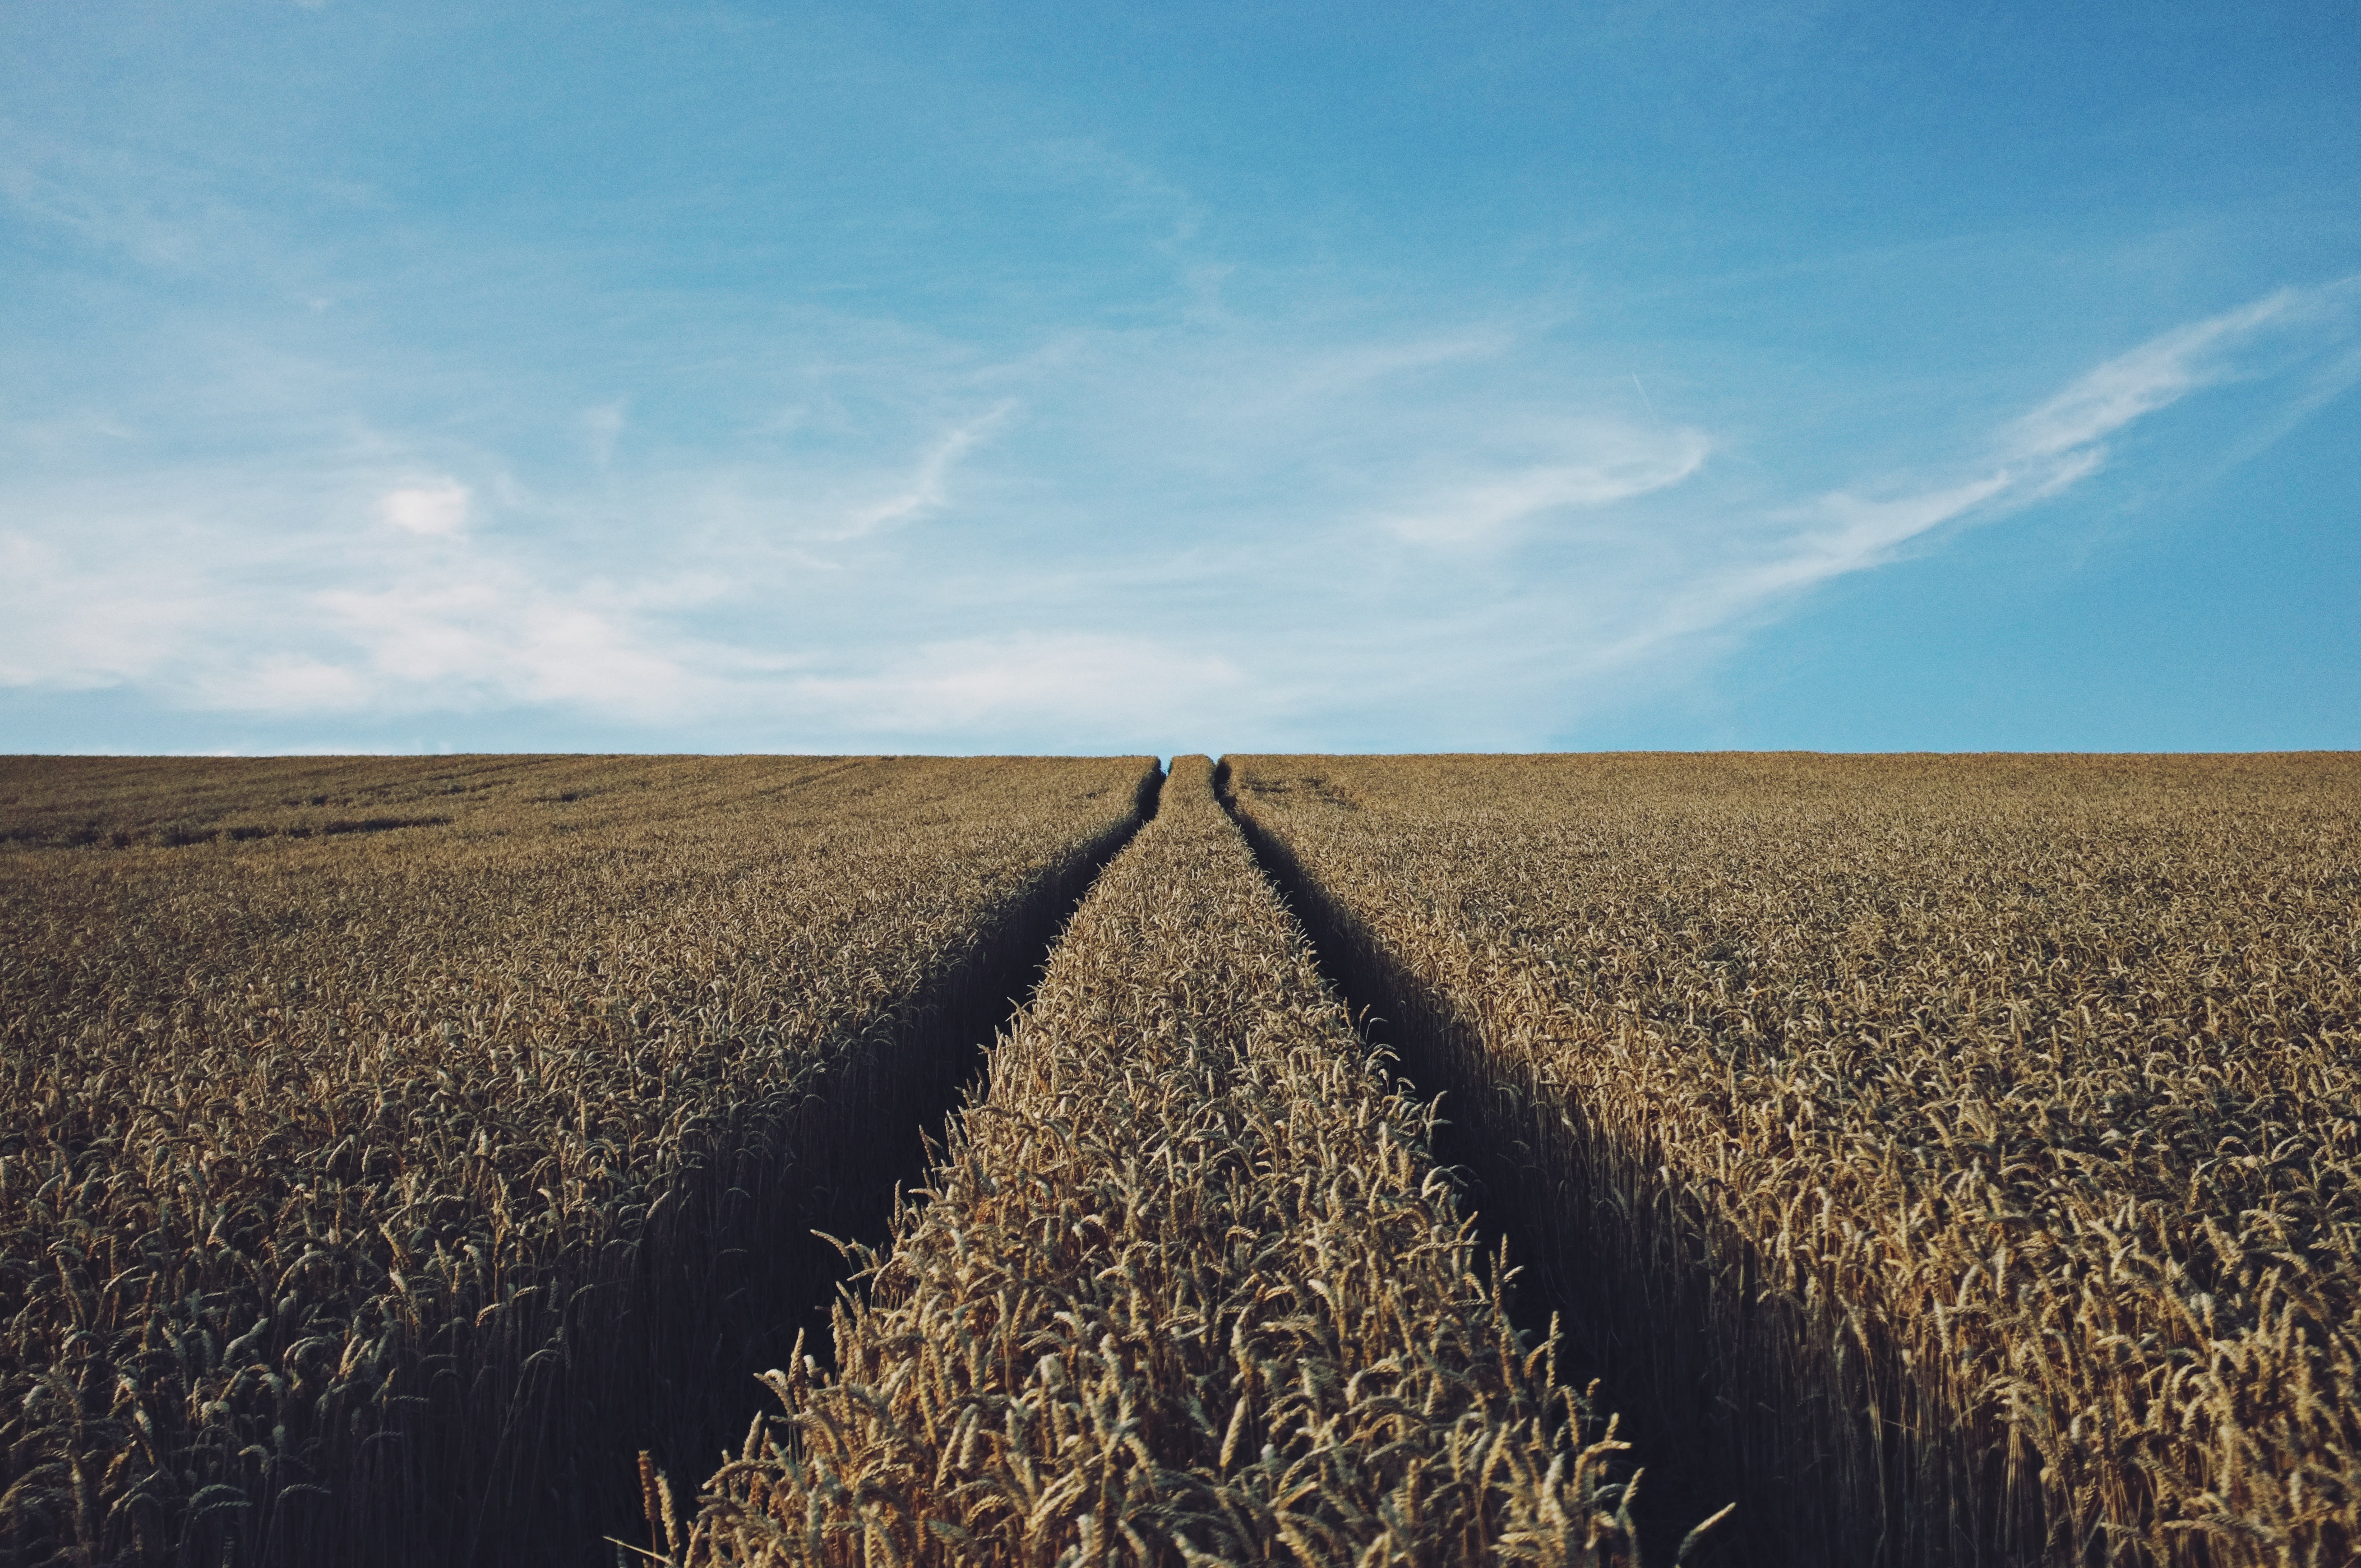 Field, Agriculture, Crop, Food, Grain, HQ Photo